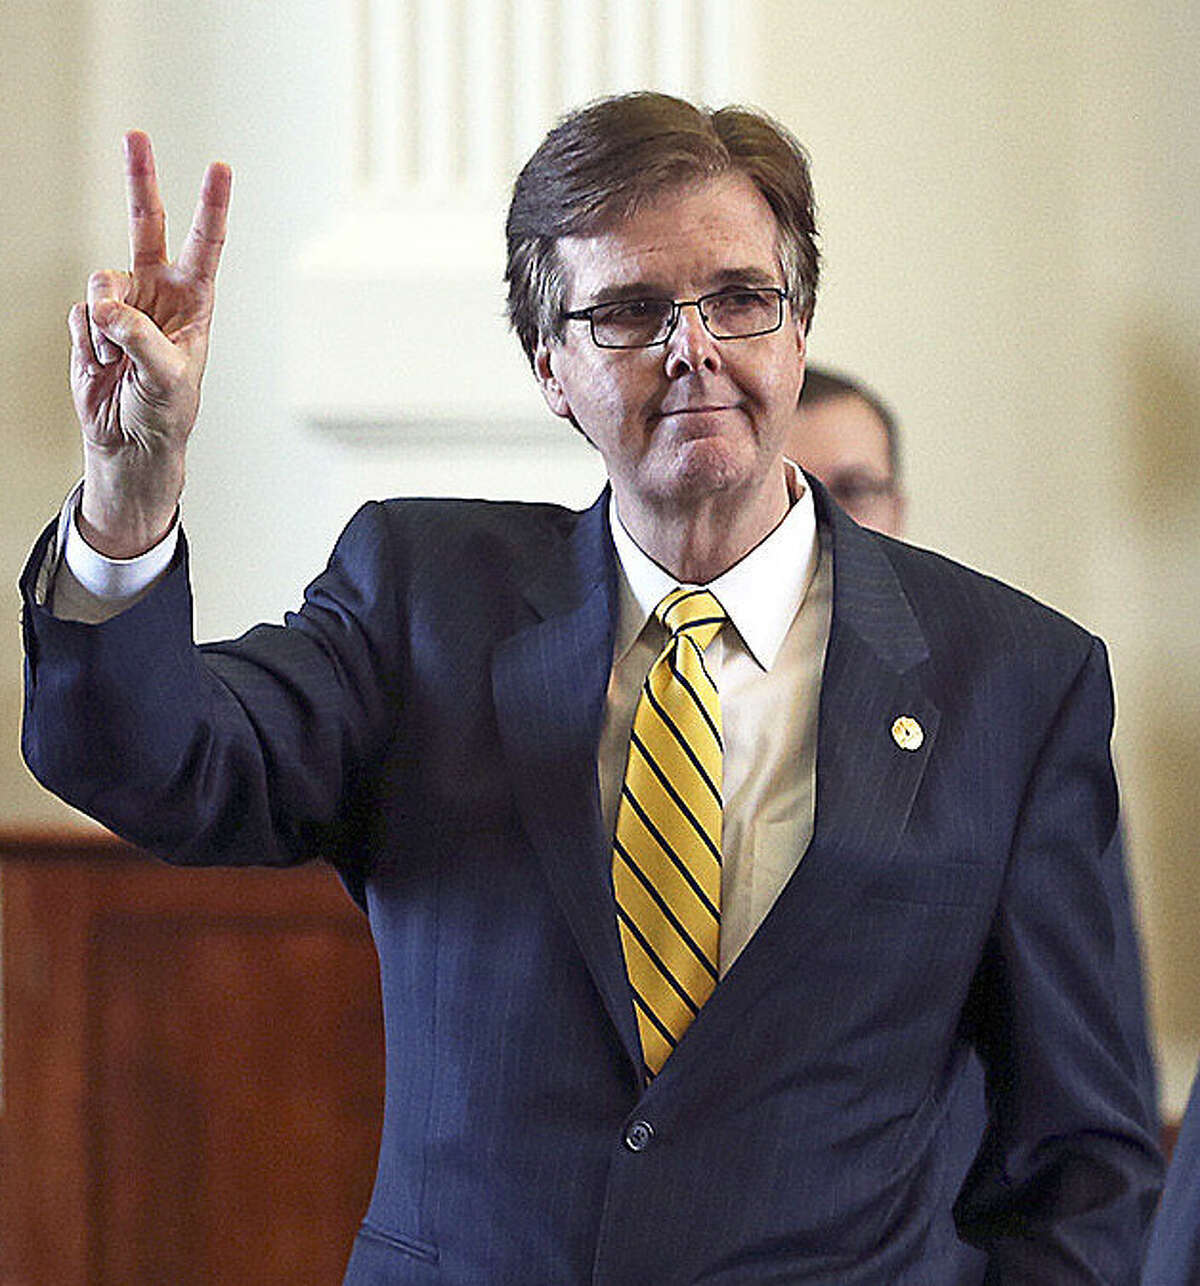 Sen. Dan Patrick says the lieutenant governor took credit for the work of a team.